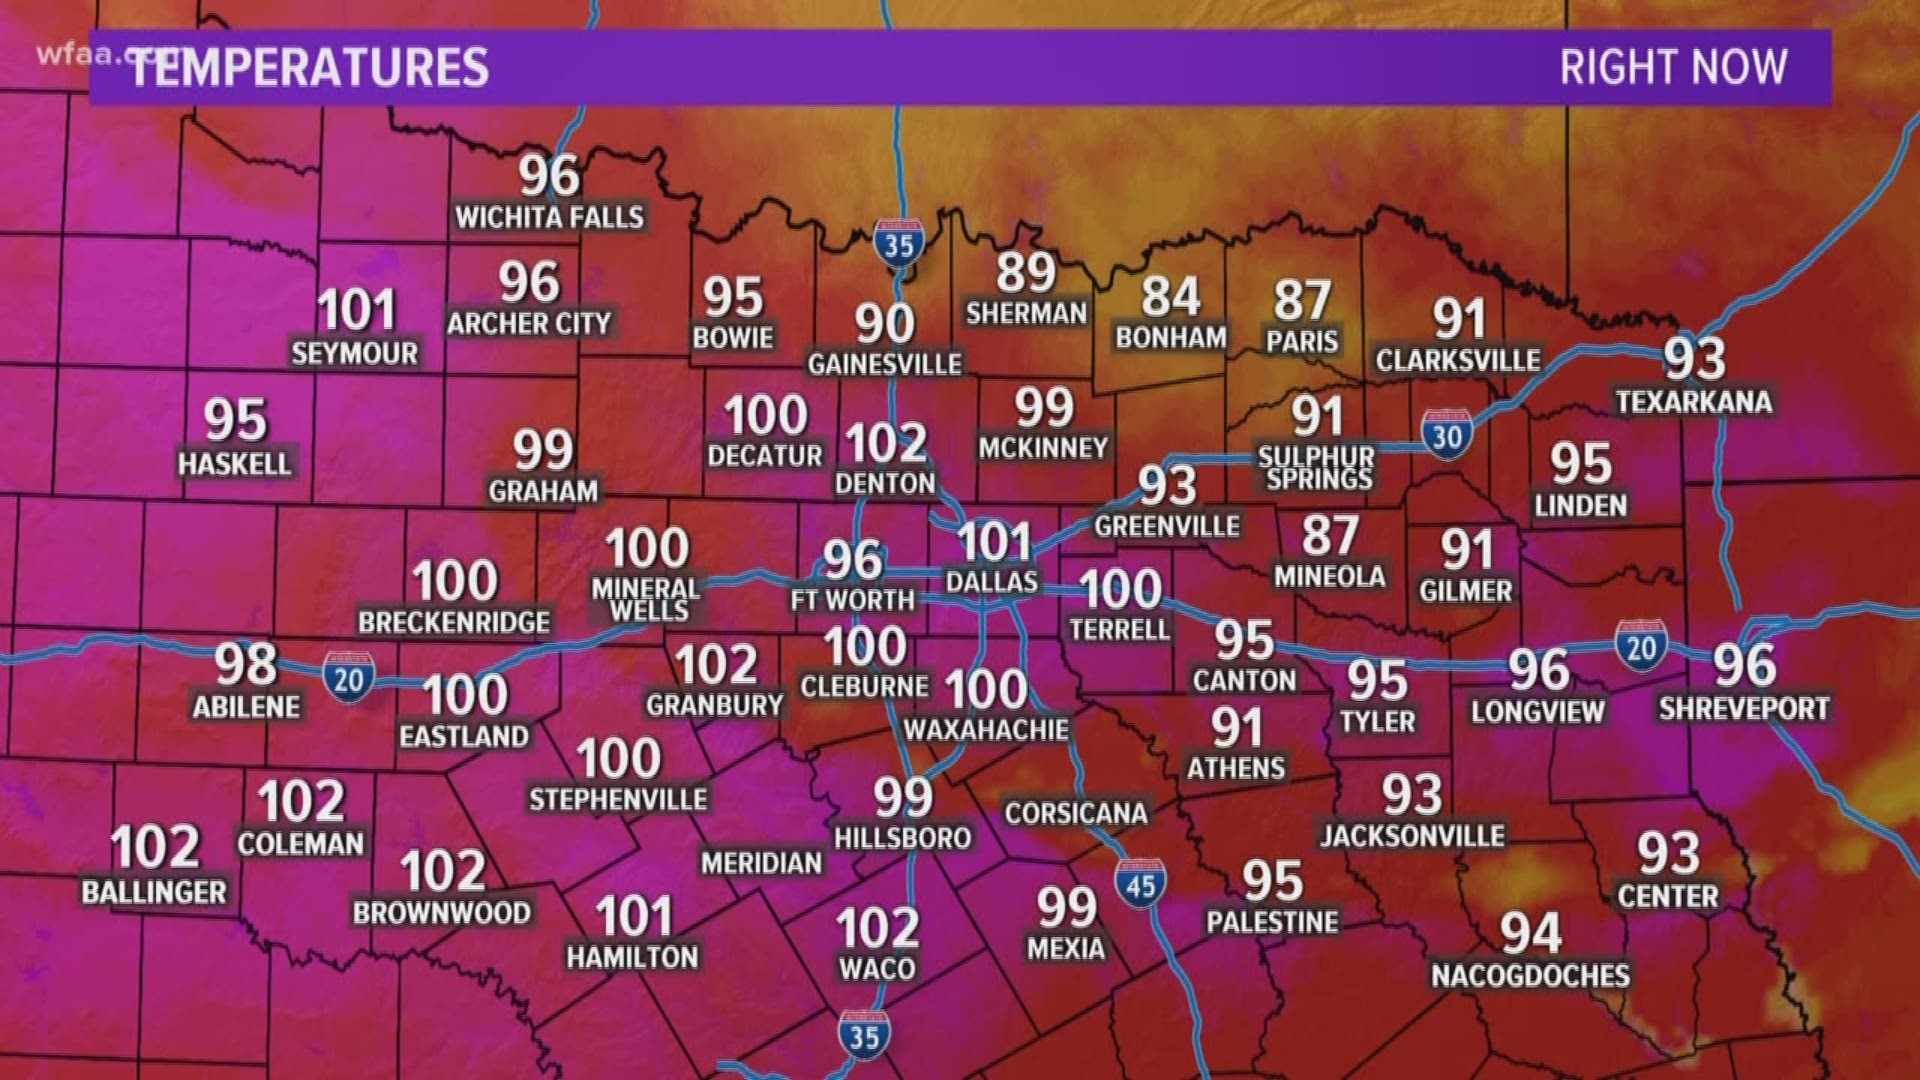 June 22 marked the first 100-degree day at DFW Airport, the thermometer of record in the area. Jesse Hawila has more.